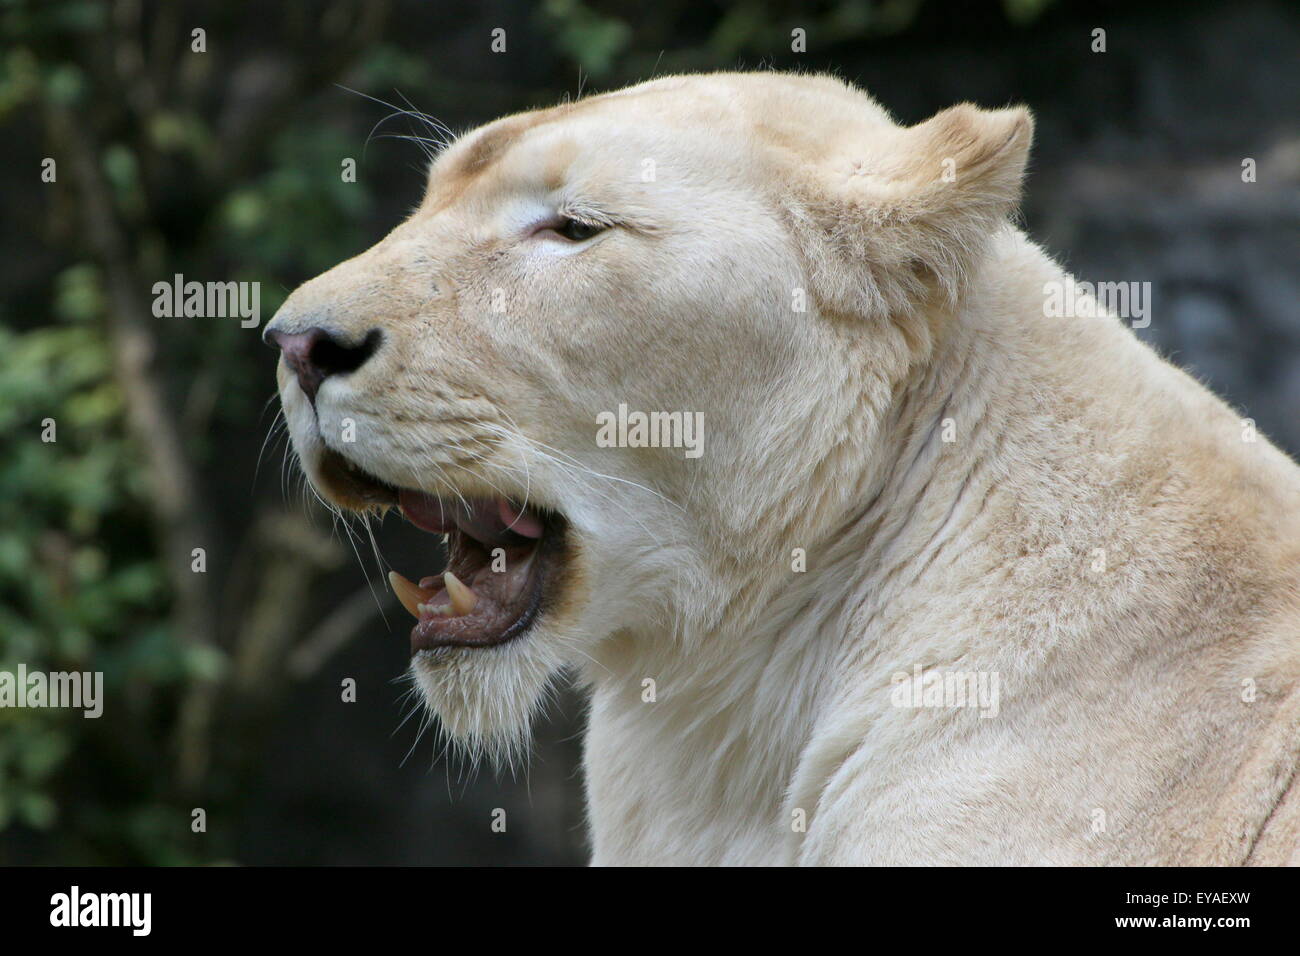 White lioness (Panthera leo Krugeri) portrait, mouth open, canines showing Stock Photo